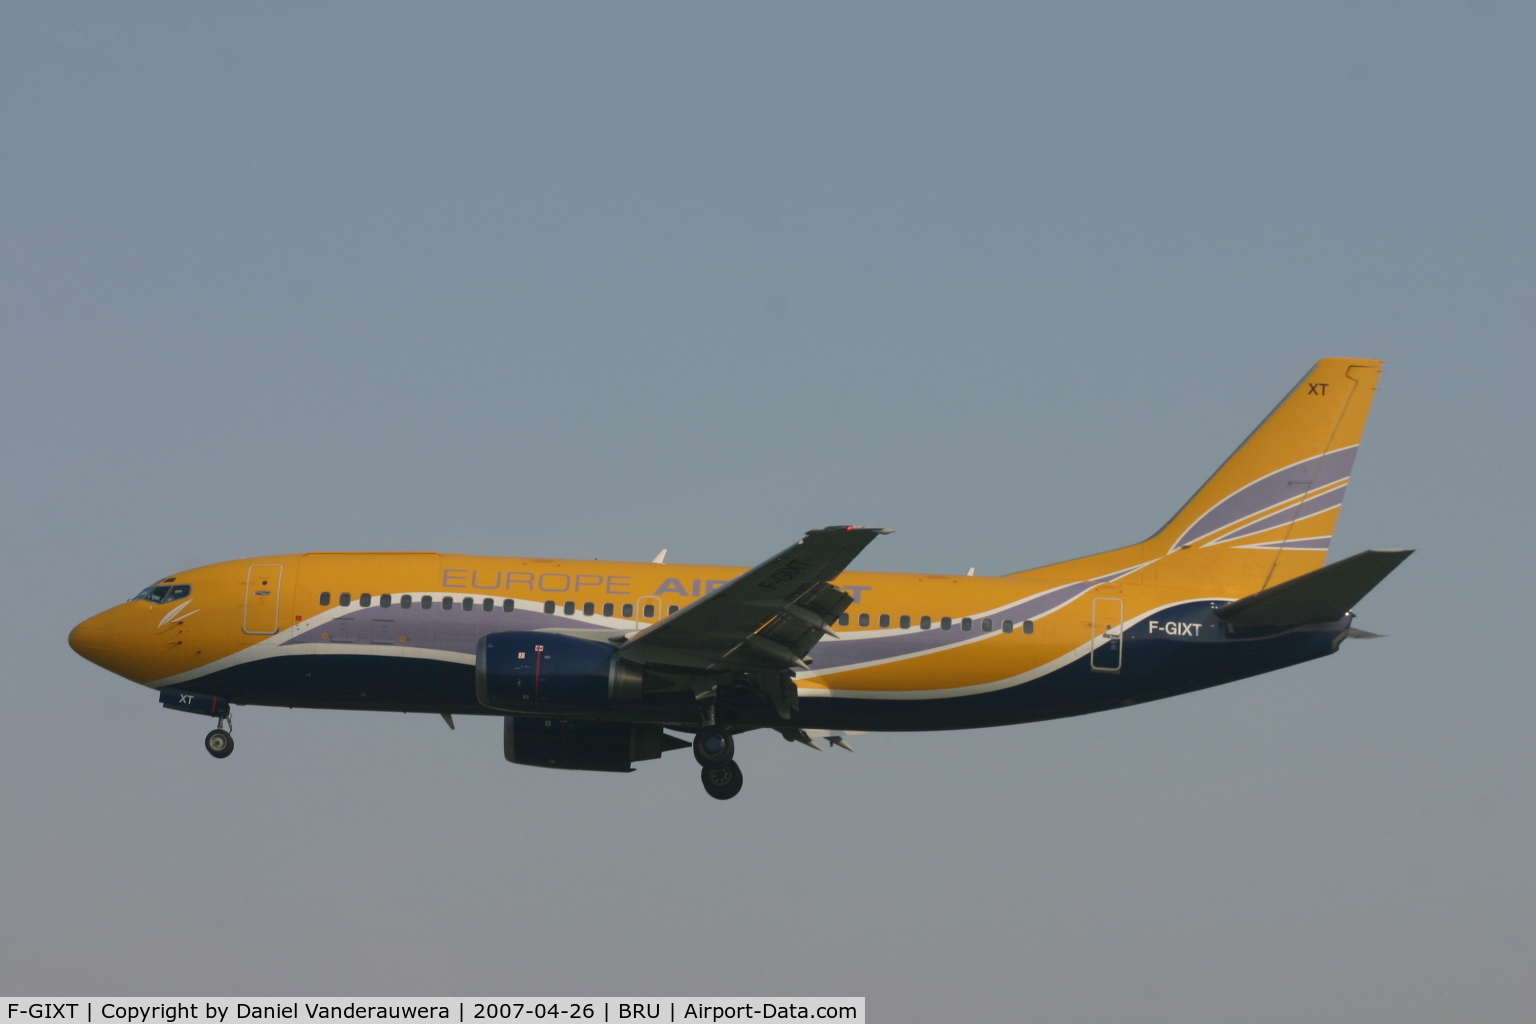 F-GIXT, 1997 Boeing 737-39M C/N 28898, flight FPO1781 is descending to rwy 25L